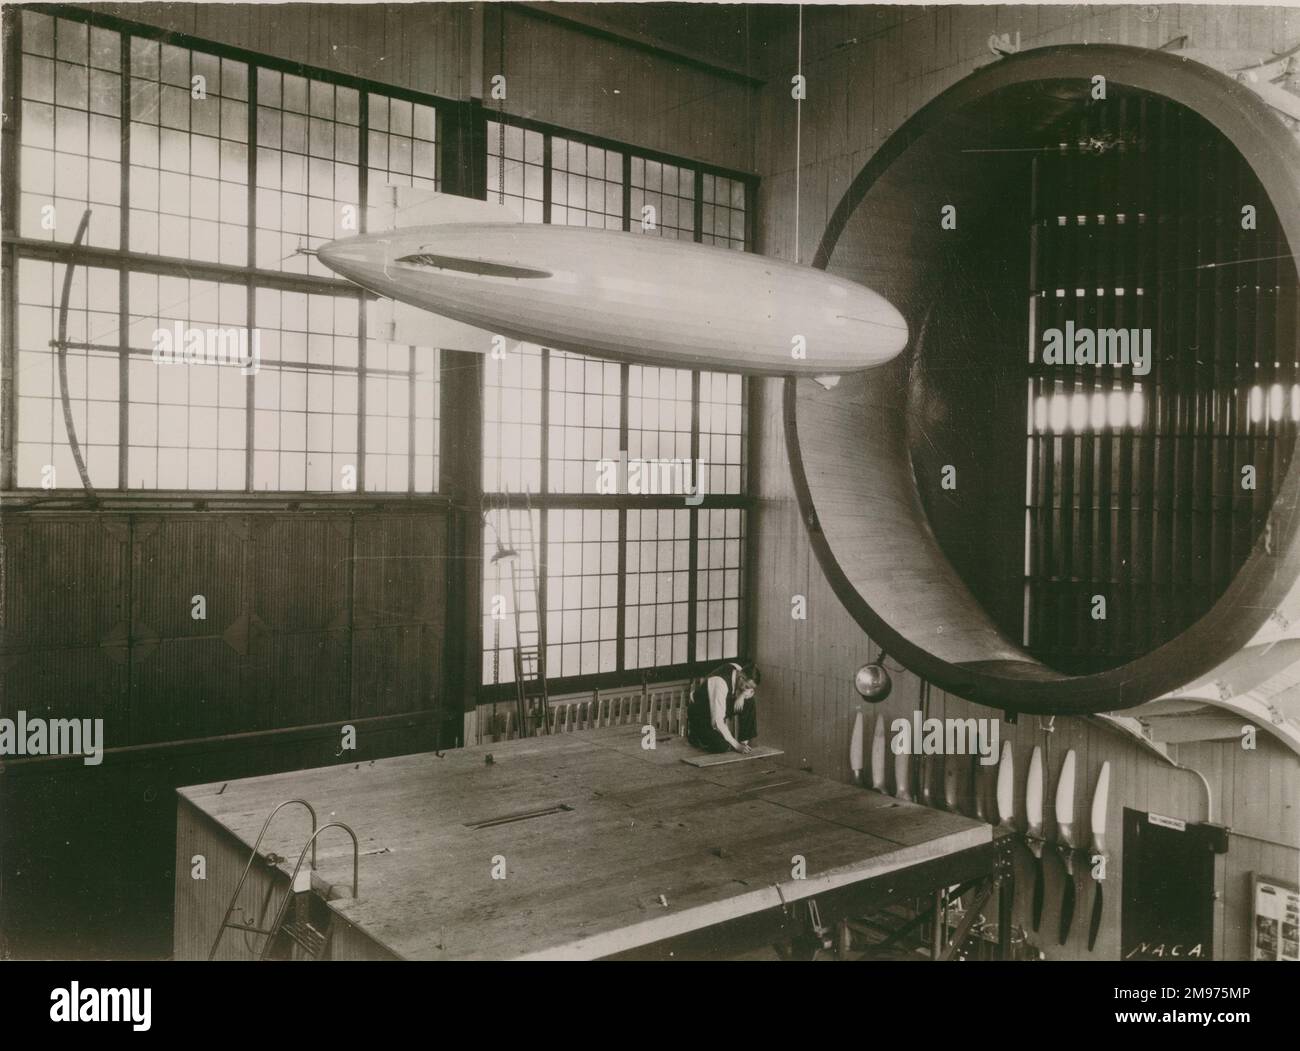 A 1/40 scale model of the airship Akron in the Full-Scale wind tunnel at the National Advisory Committee of Aeronautics Laboratories at Langley Field, Virginia, USA, in January 1935. Stock Photo